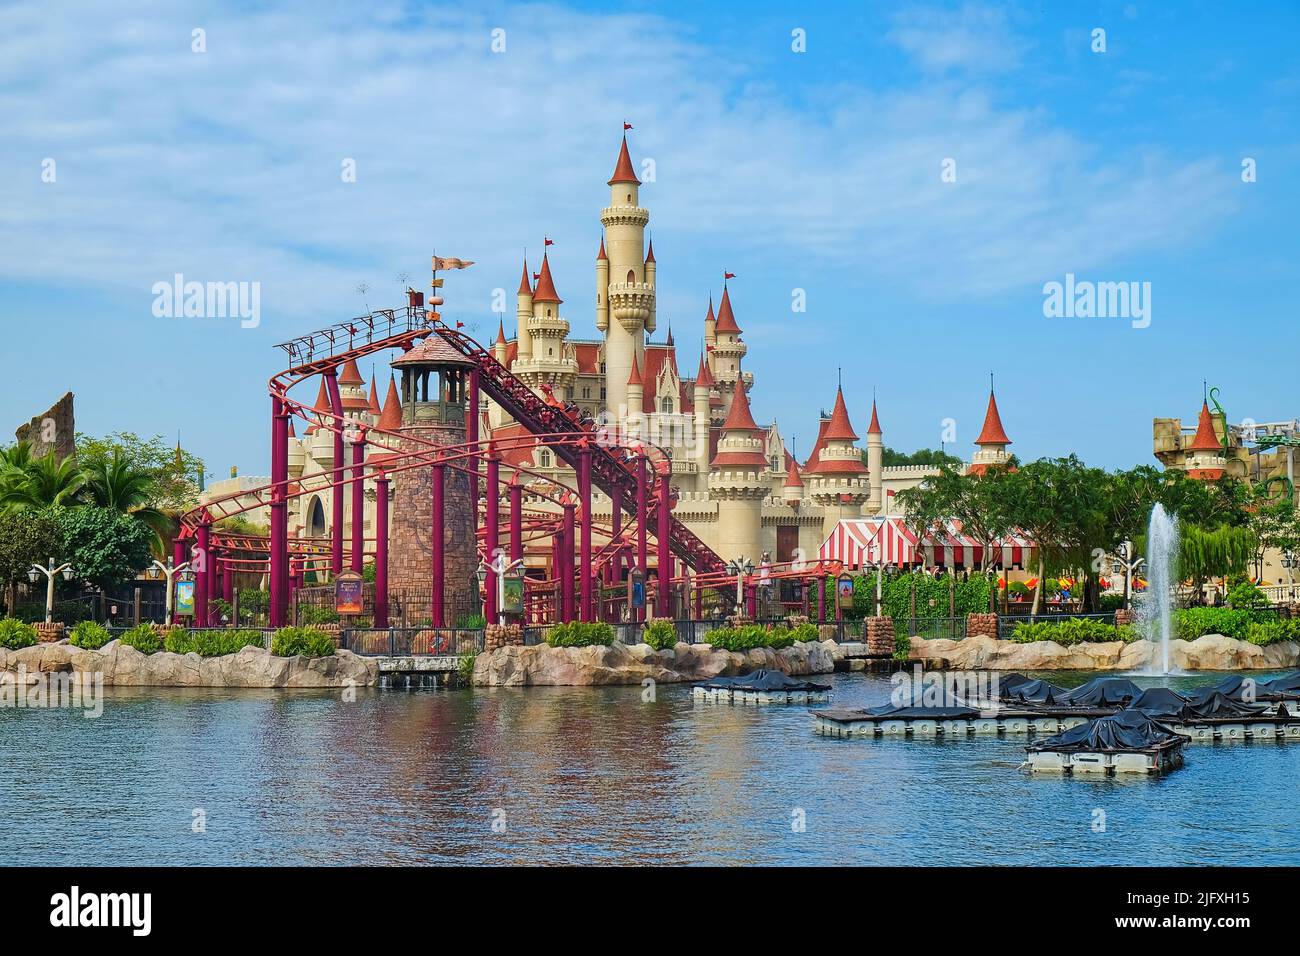 Scenery view of the beautiful fairytale castle with the roller coaster in Far Far Away zone in Universal Studios Singapore, a theme amusement park Stock Photo